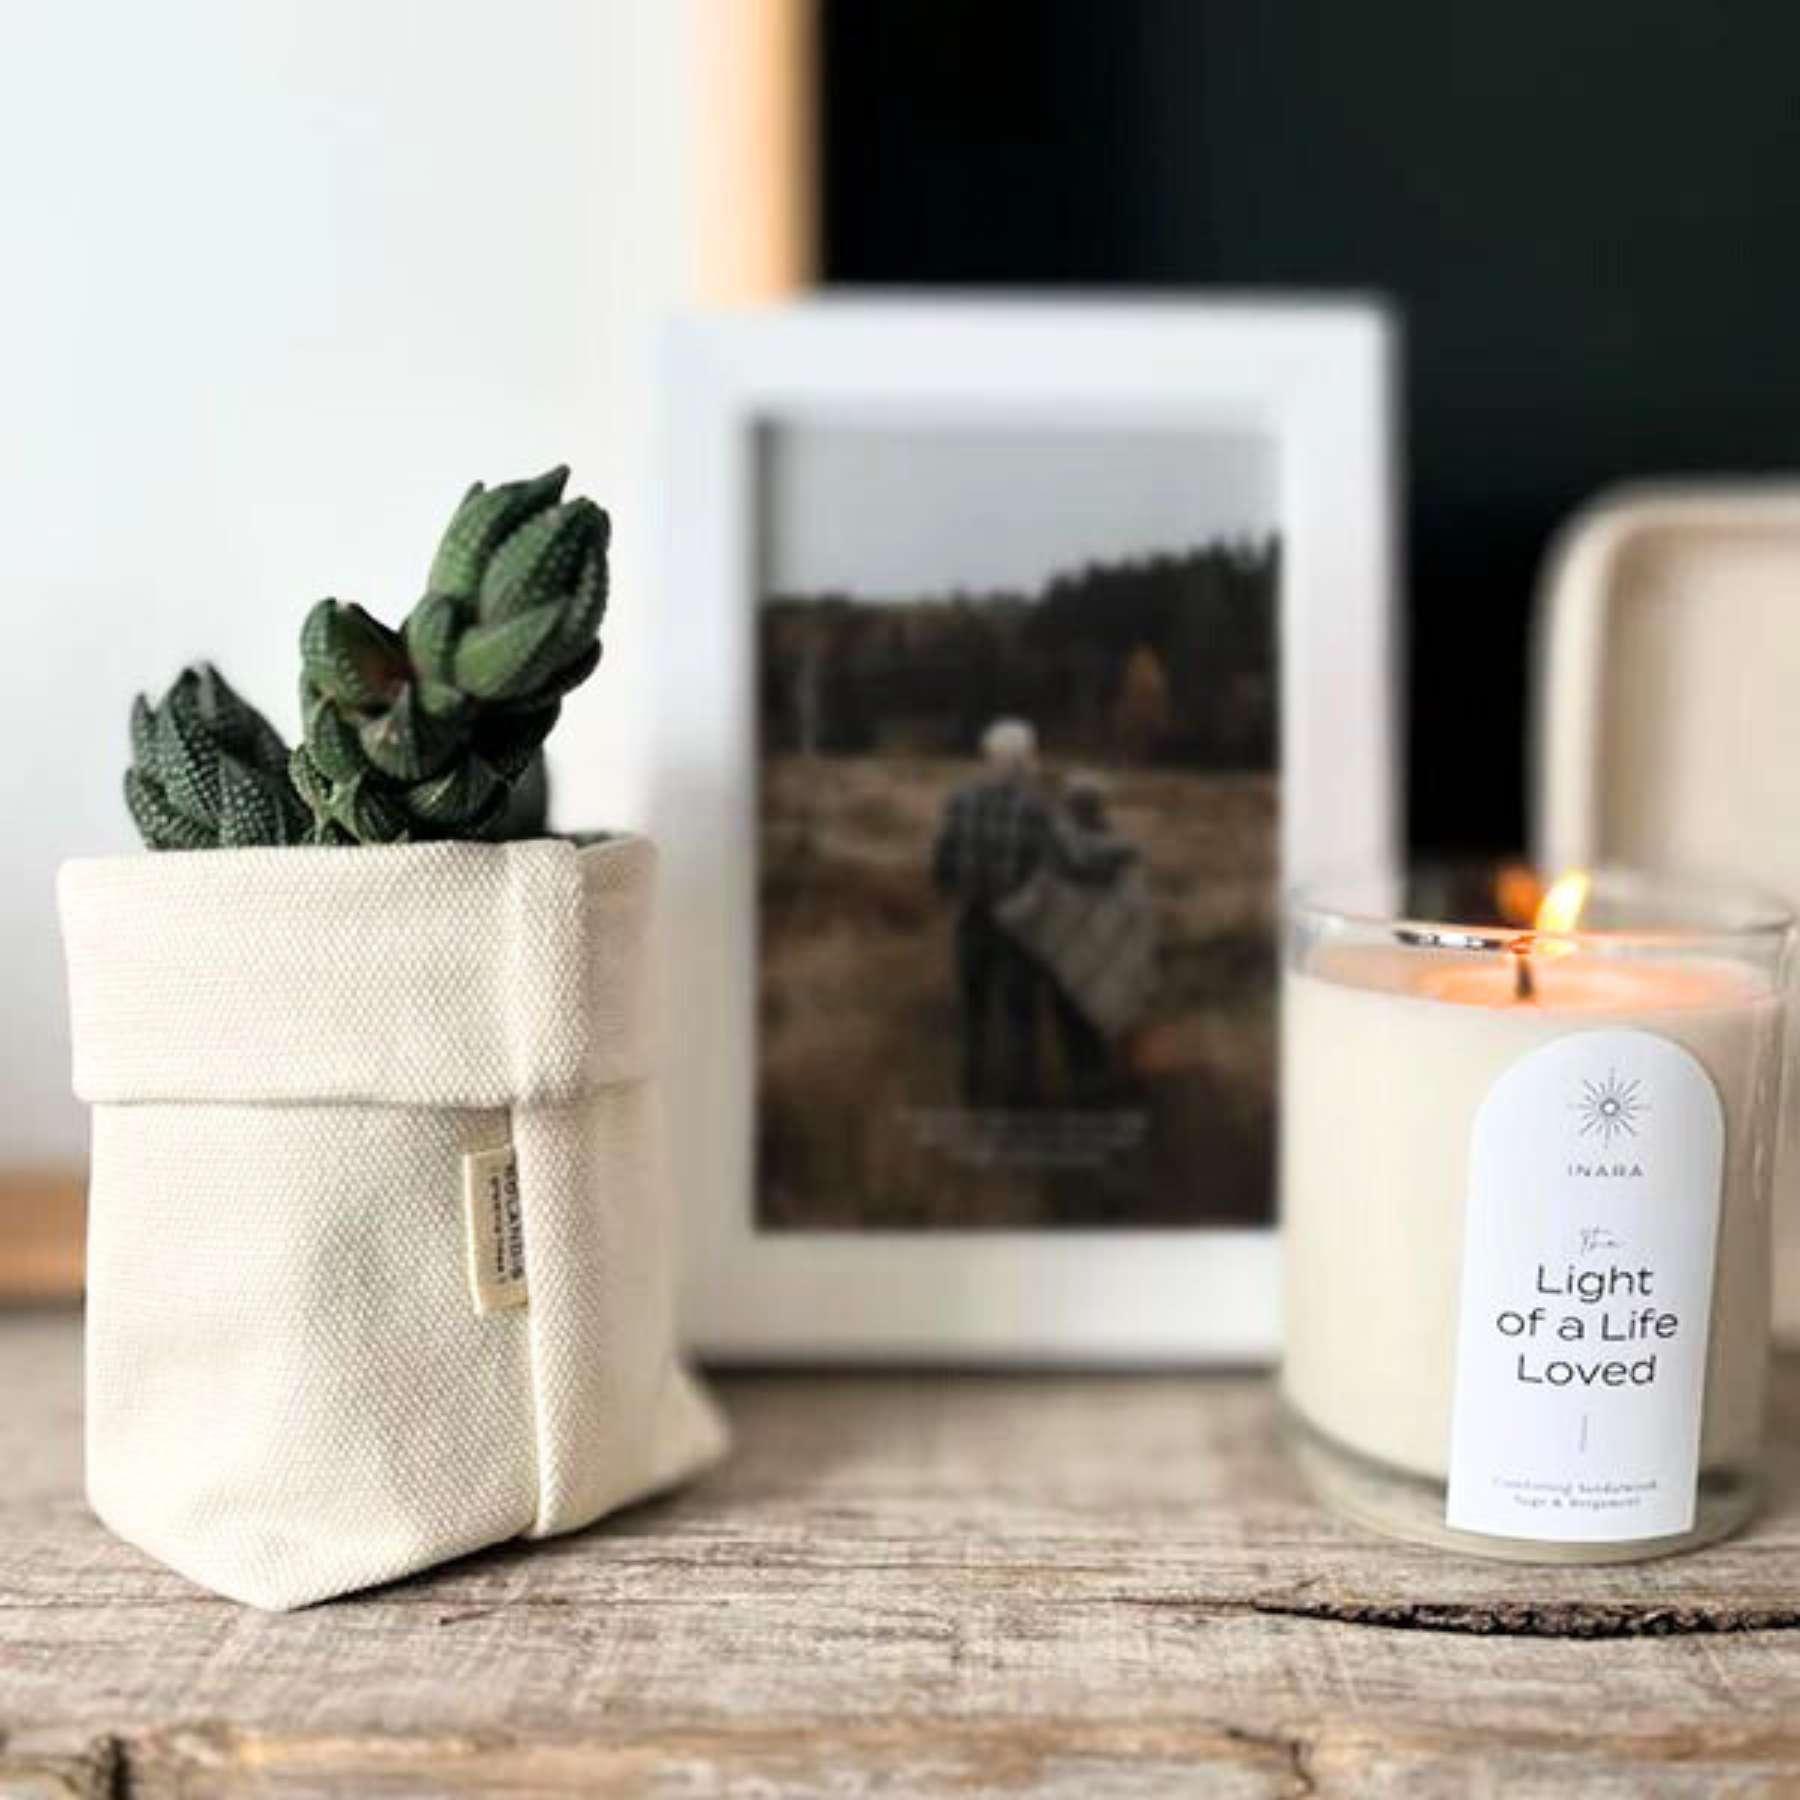 A potted succulent in a cream-coloured SOLANDIS fabric container on a rustic wooden table, alongside a framed photo and lit INARA candle, part of the Fabulous Flowers and Gifts collection.